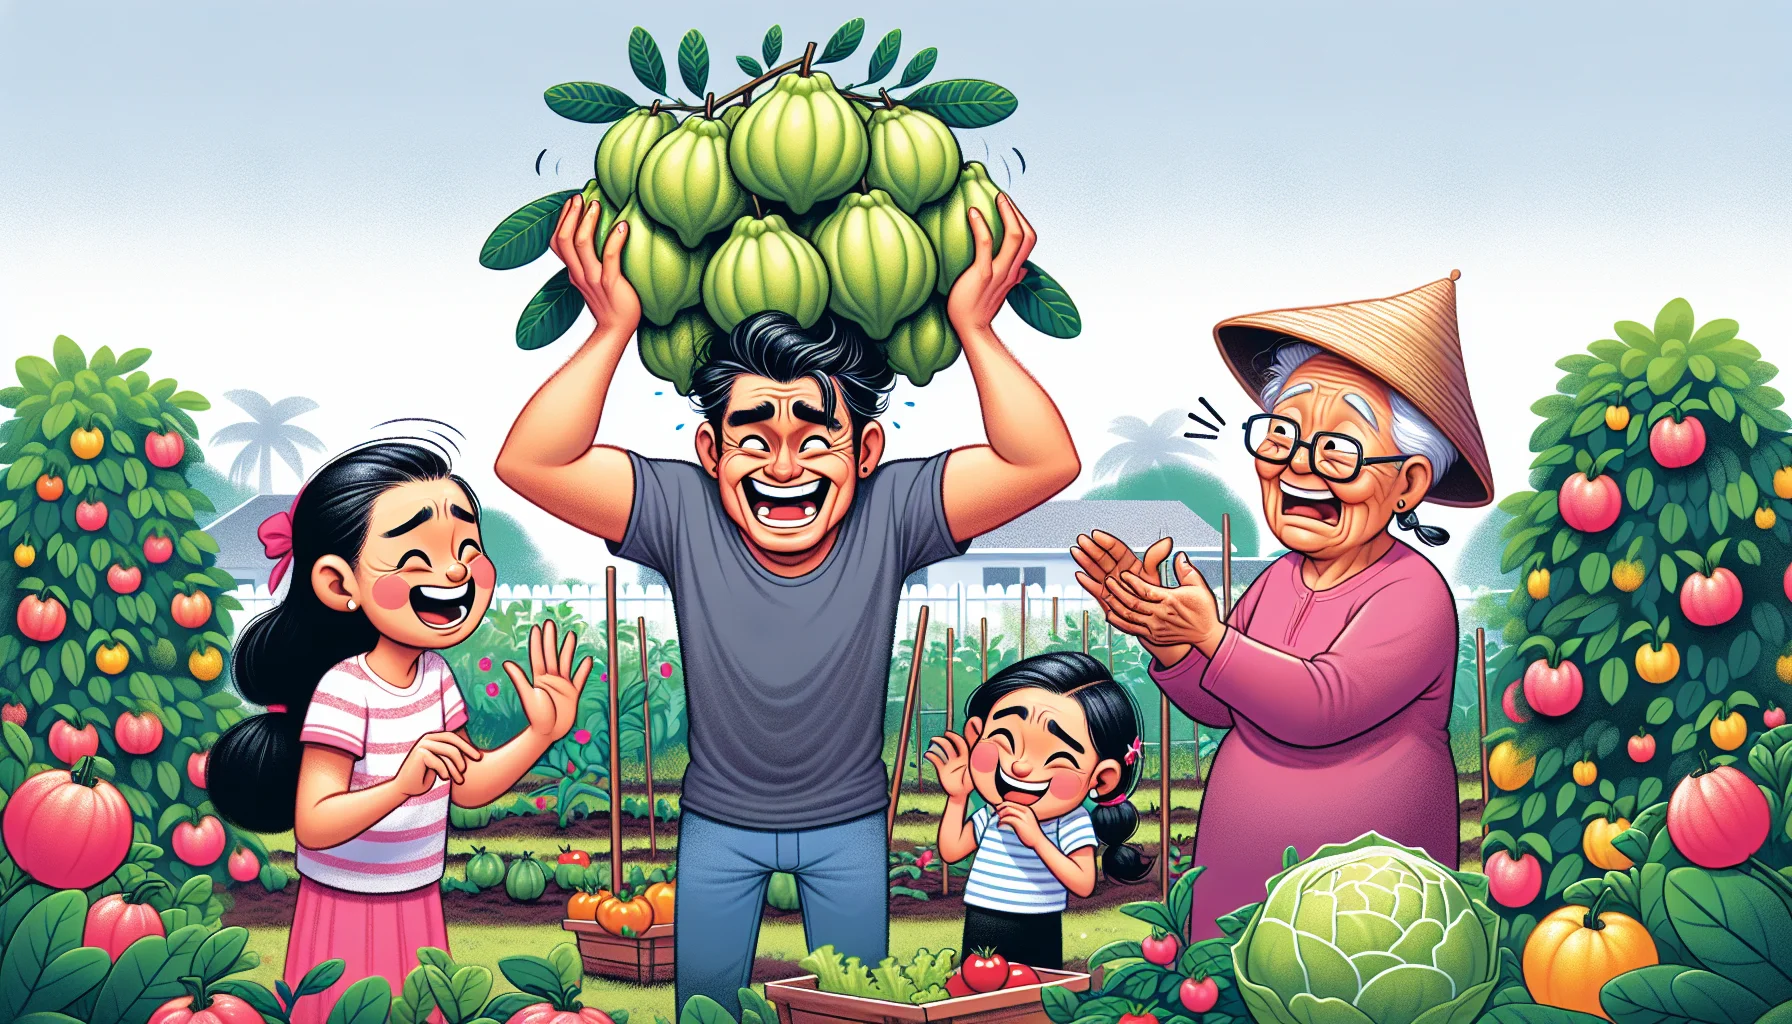 Illustrate a humorous gardening scenario. A South Asian man with a touch of grey hair is in the middle of the garden trying to balance an overgrown guava fruit on his head. A young Black girl is giggling beside him while an East Asian elderly woman is shaking her head in disbelief, their expressions exaggerated for a dash of comedy. The garden surrounding them is vibrant filled with thriving guavas, tomatoes, lettuces and more underscoring the joy of home gardening.